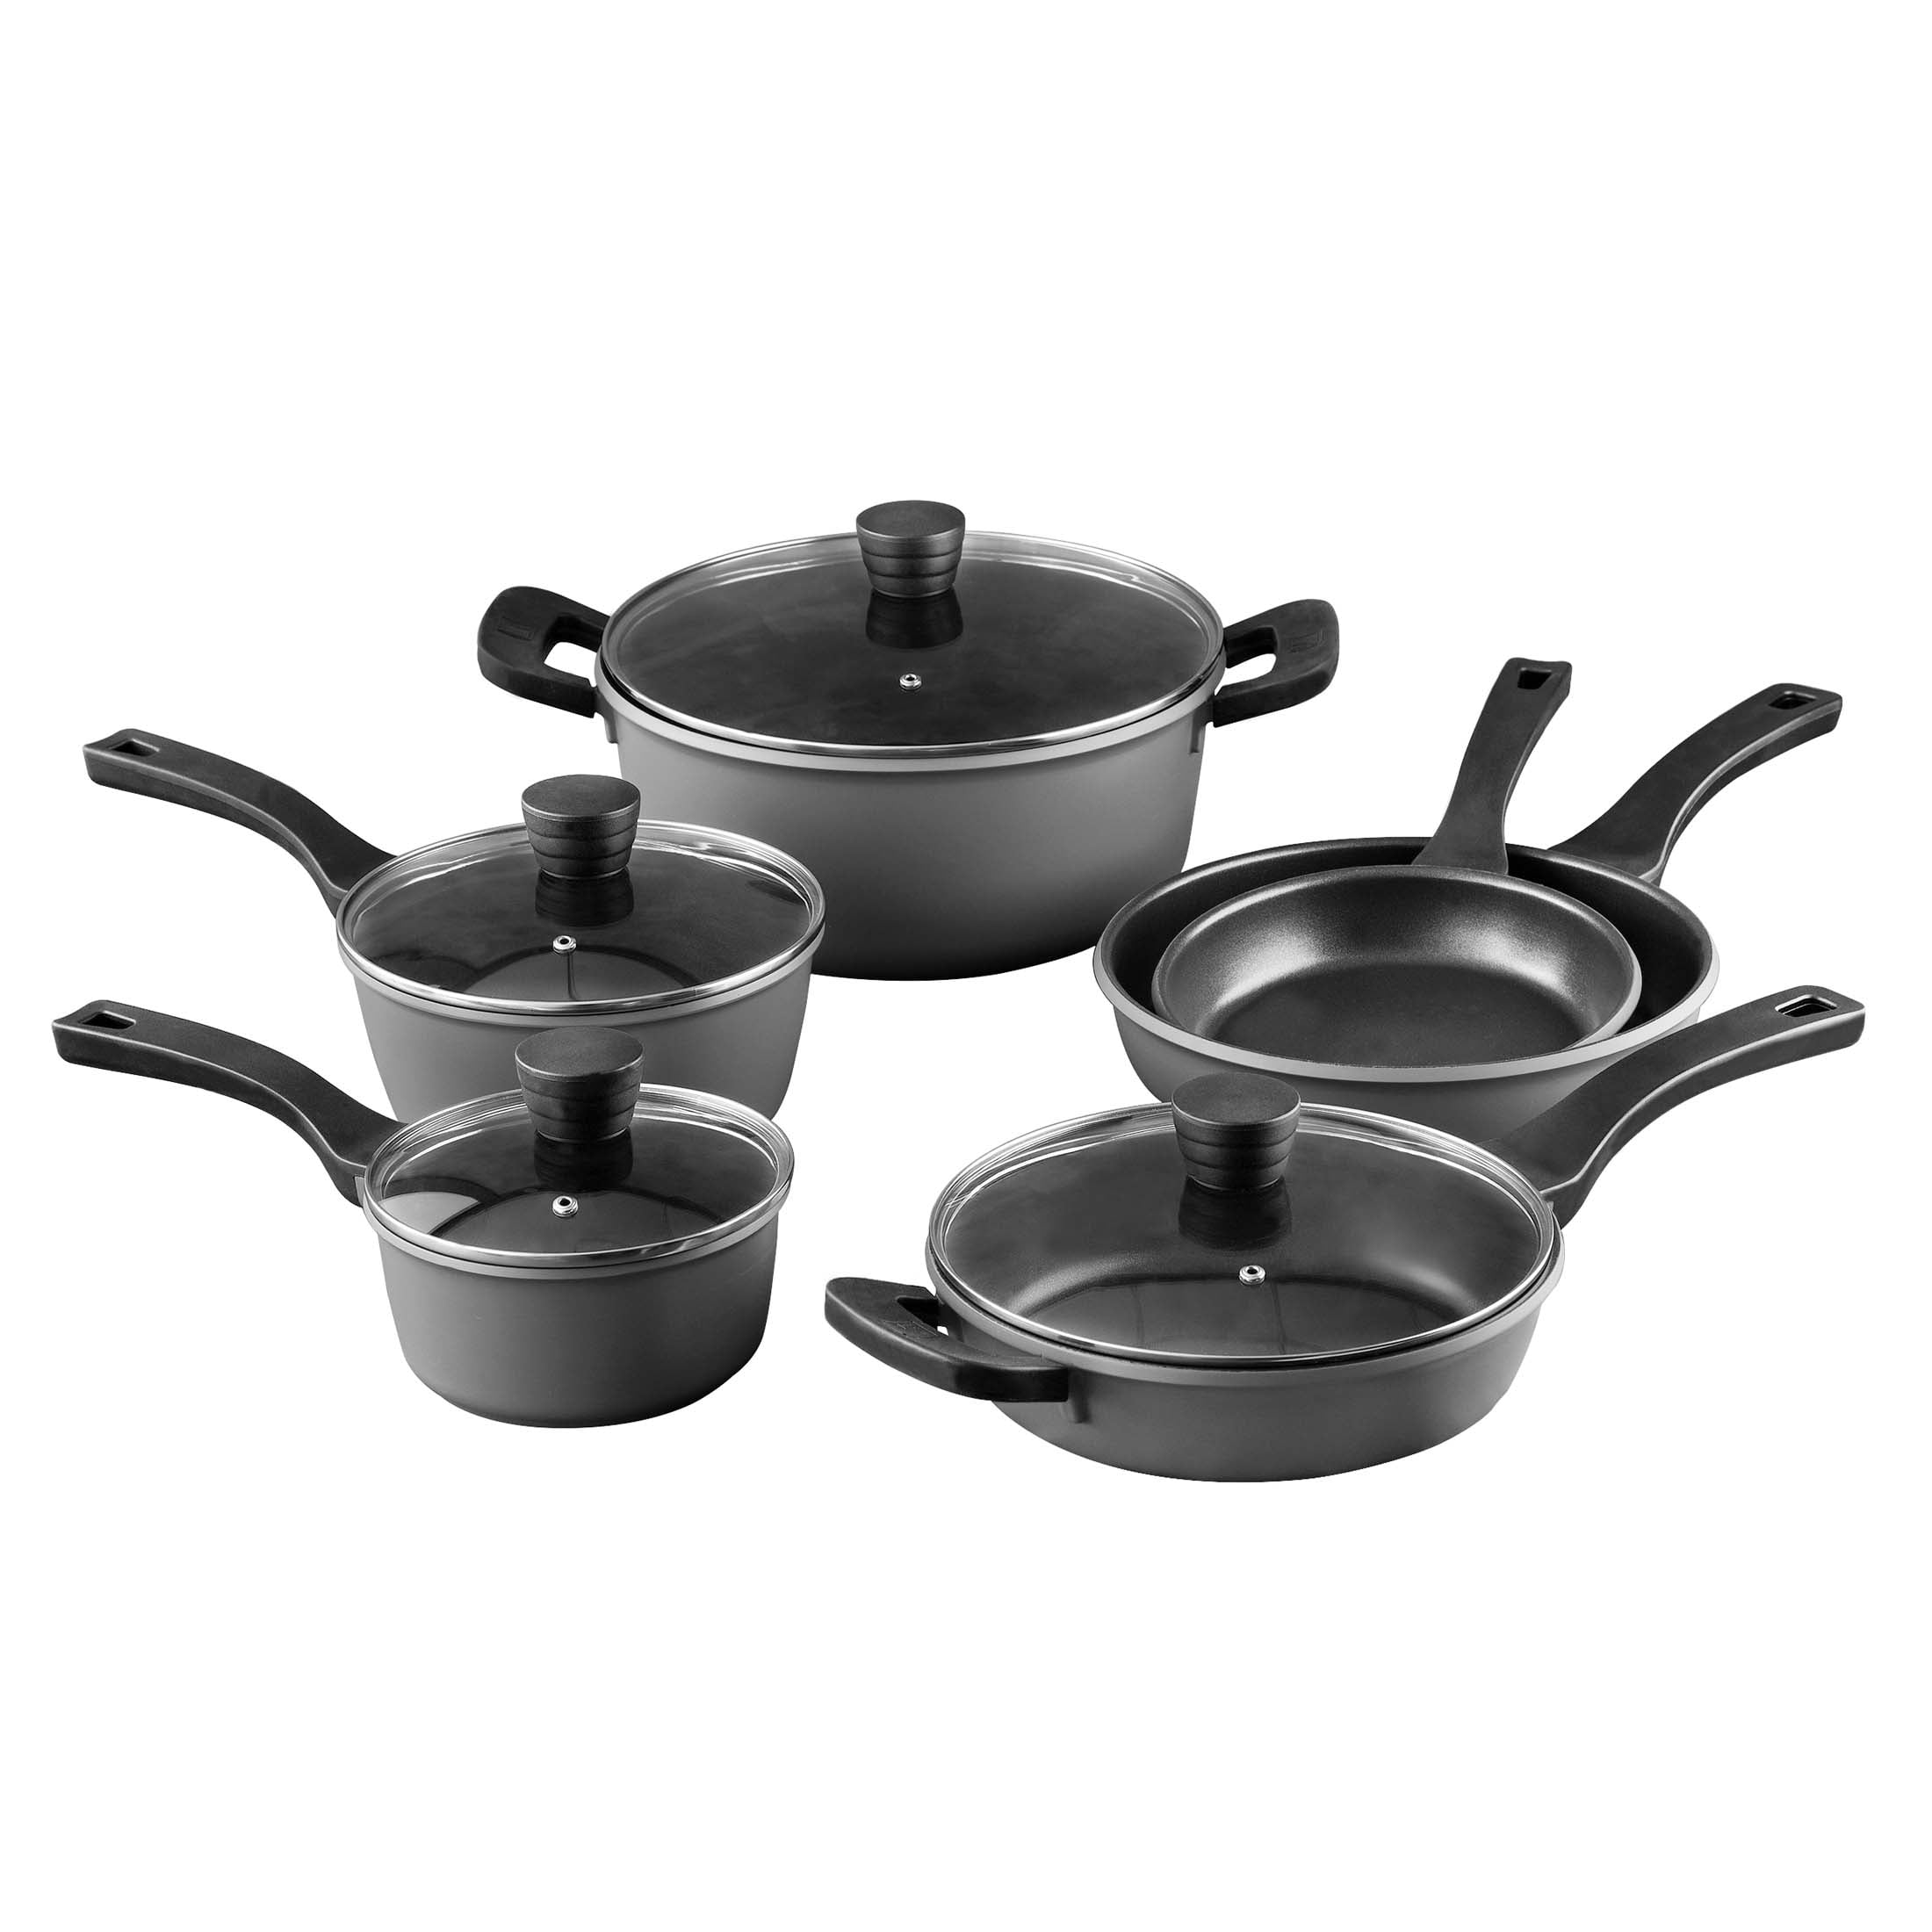 BERGNER Gravity pans kitchen sets (16,20cm) in aluminium and pots and pans  in stainless steel - AliExpress